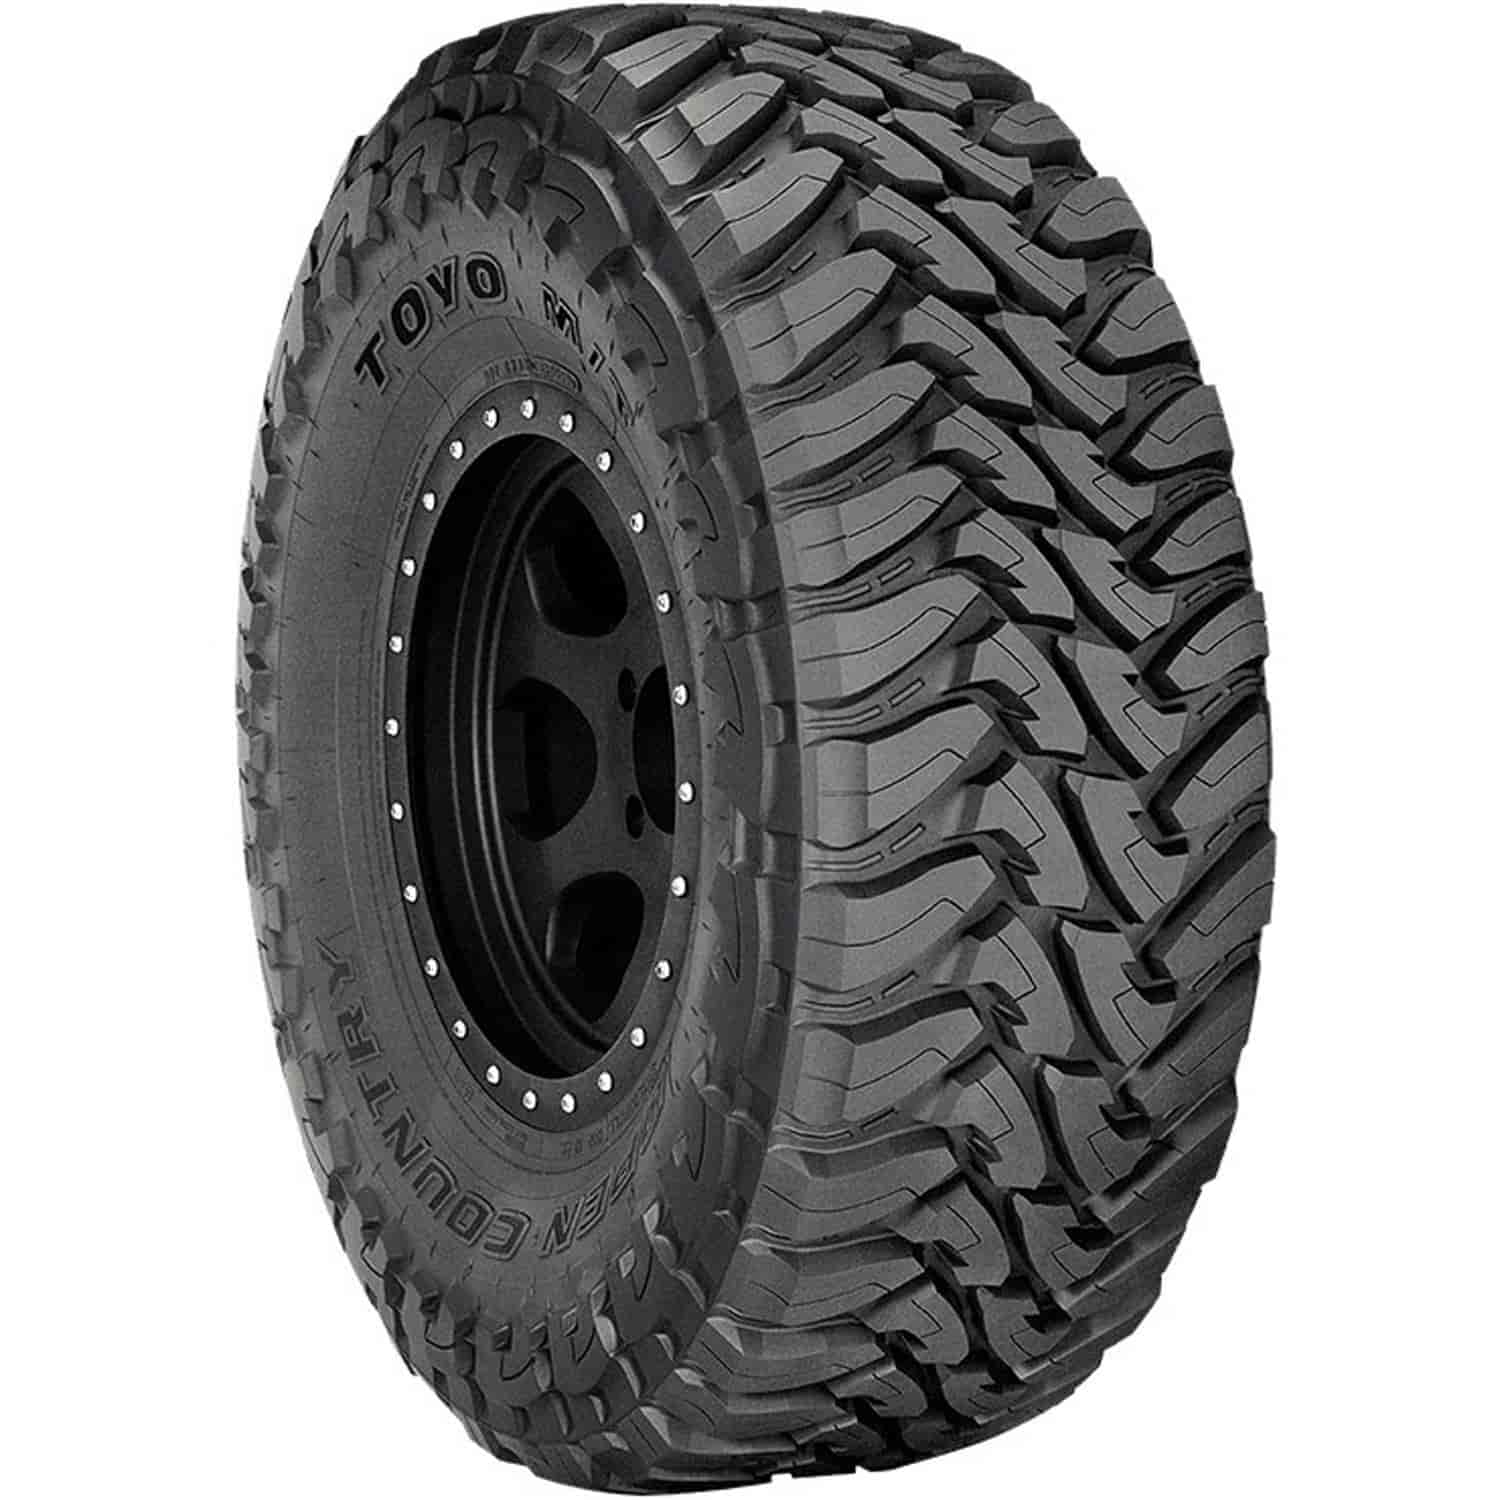 Open Country M/T LT285/70R18 127/124Q E/10 34X11.50R18